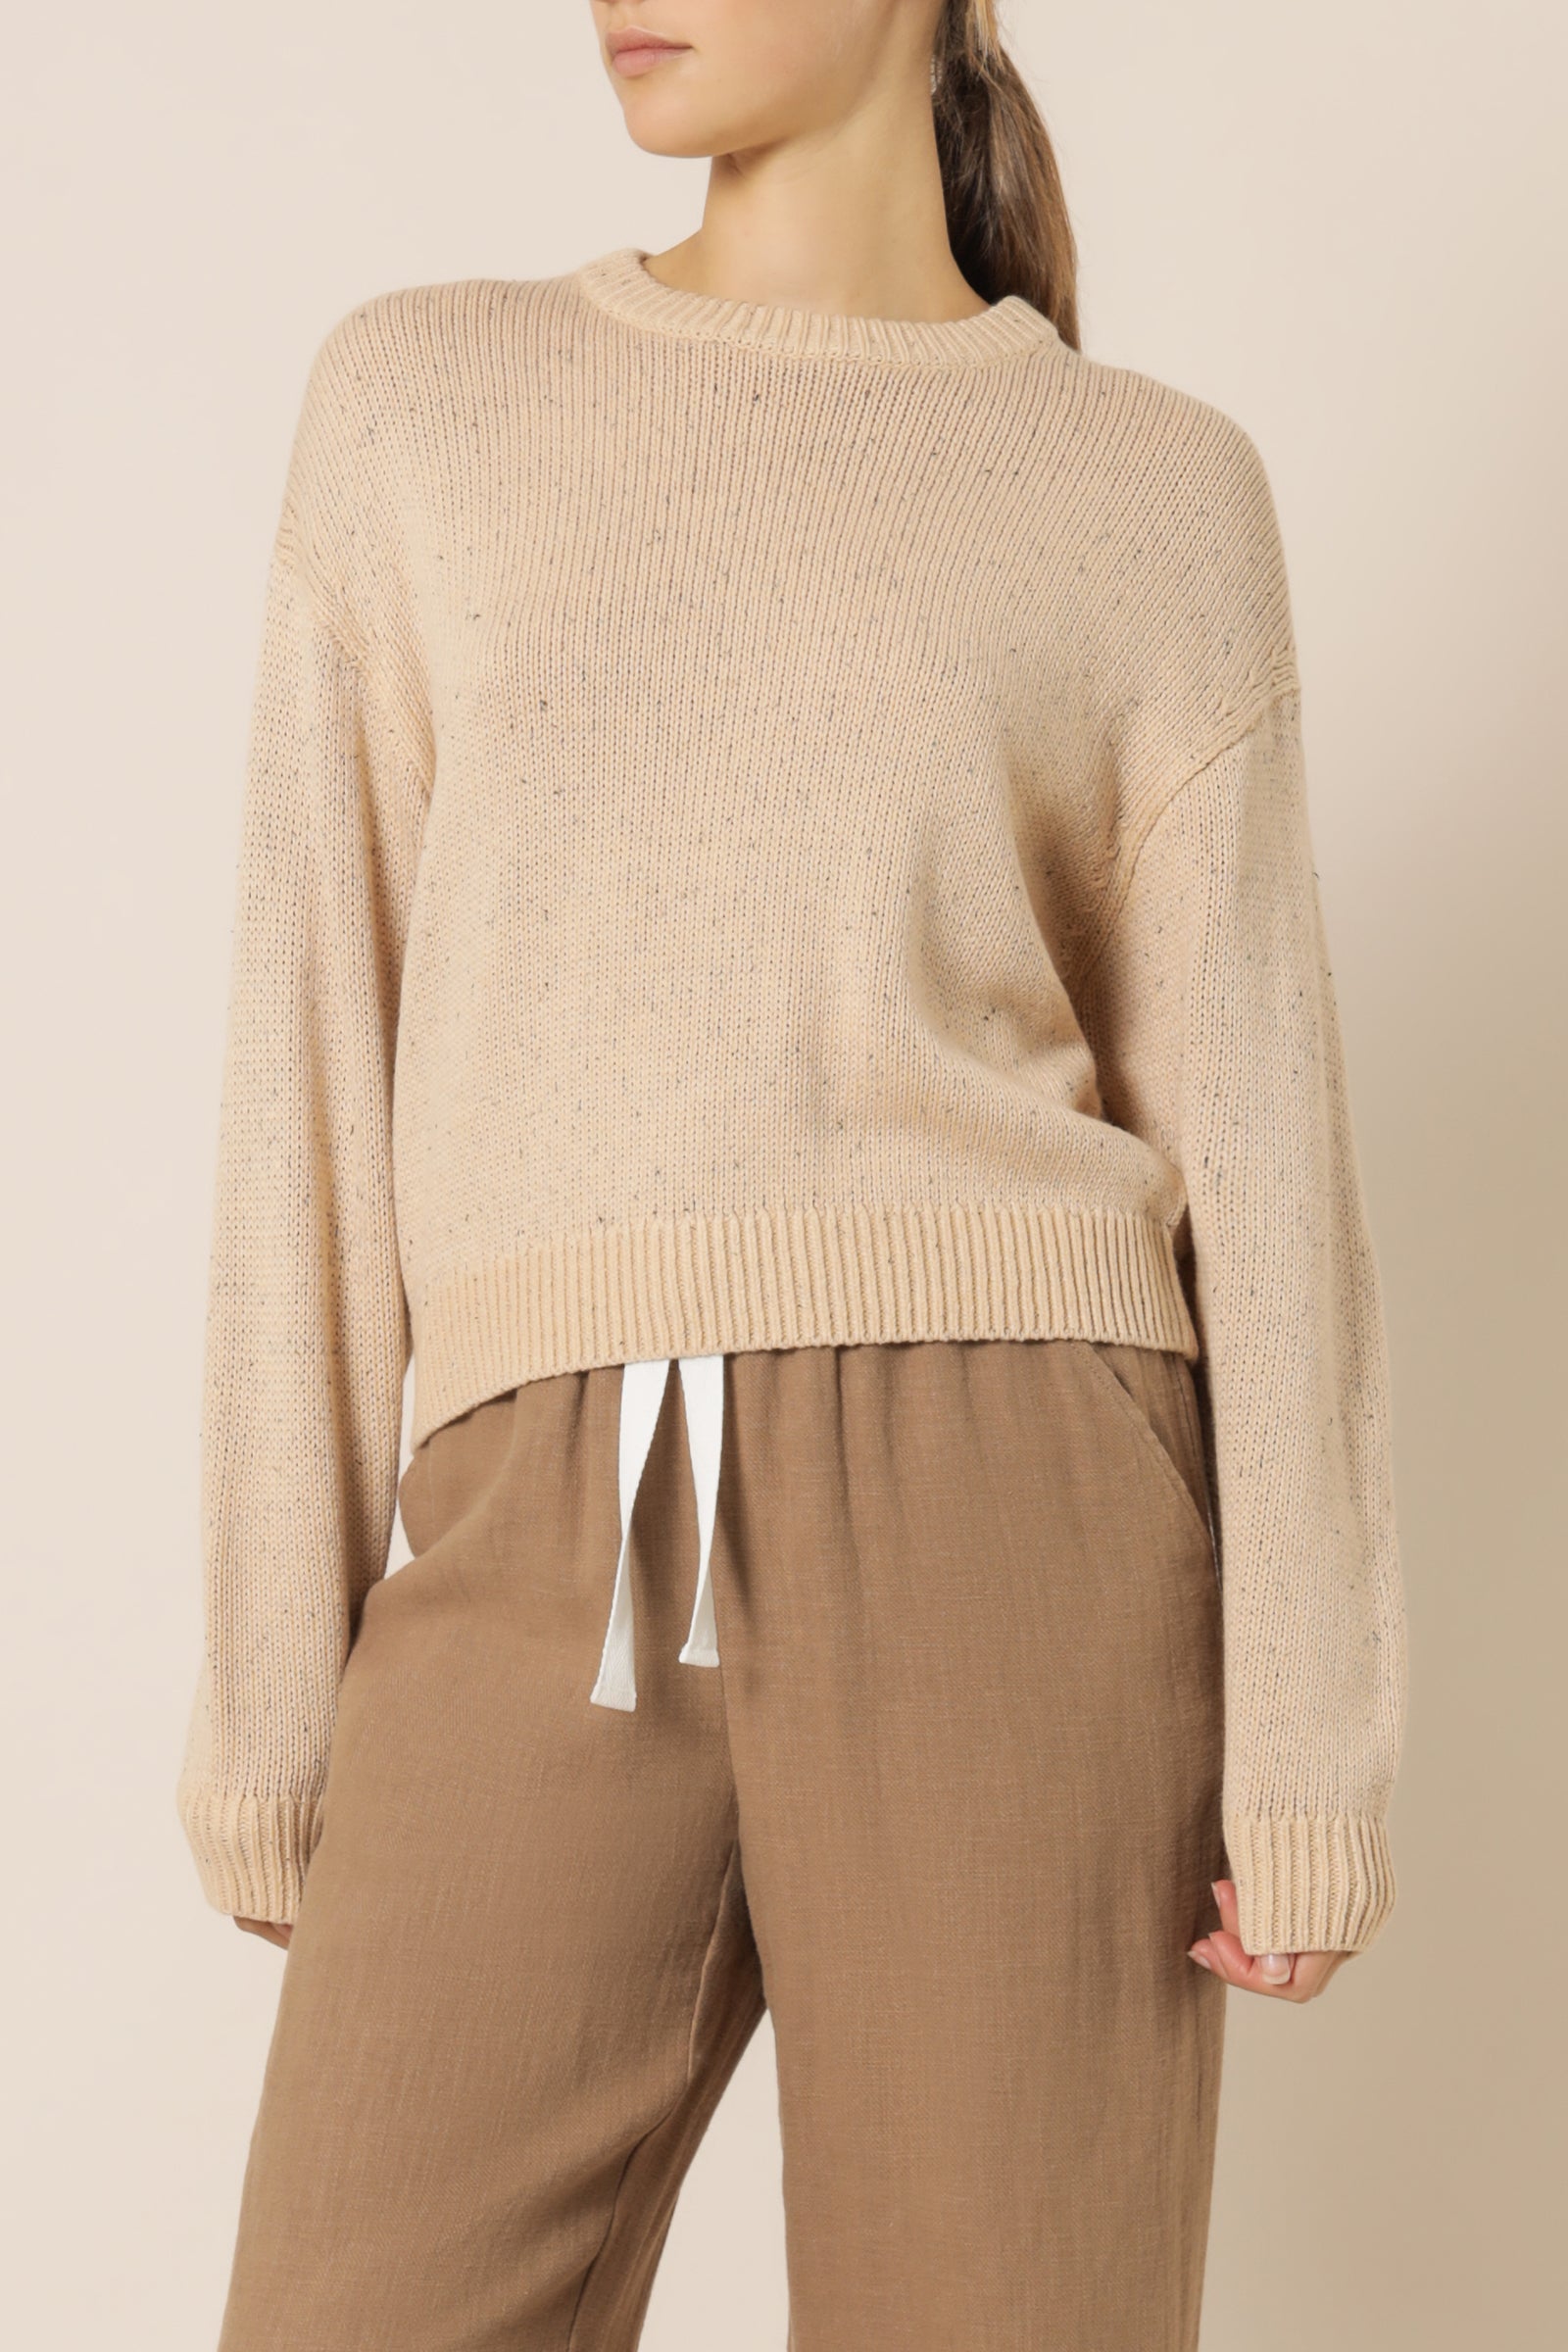 Nude Lucy lennon speckle knit honey speckle knits